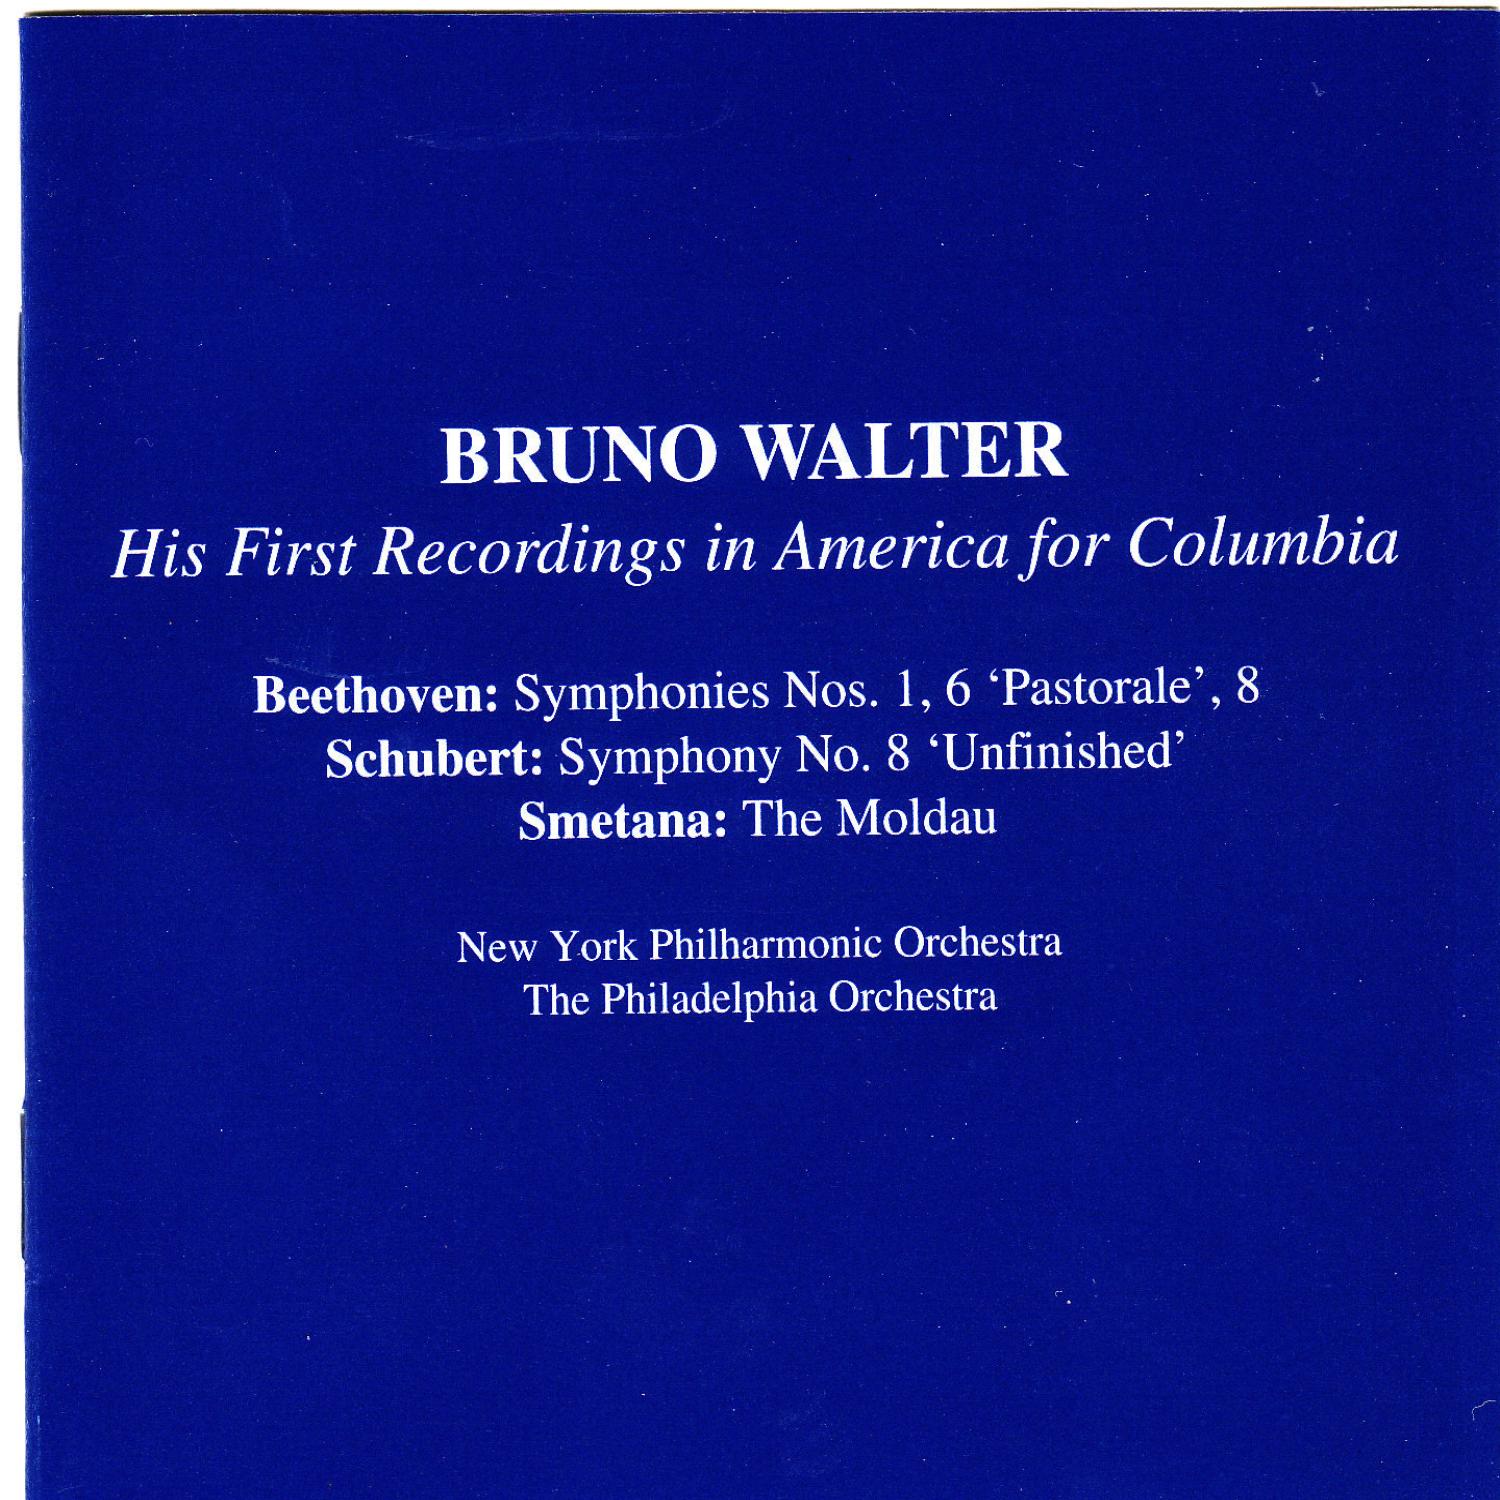 Bruno Walter, His First Recordings in America for Colombia: Beethoven - Schubert - Smetana